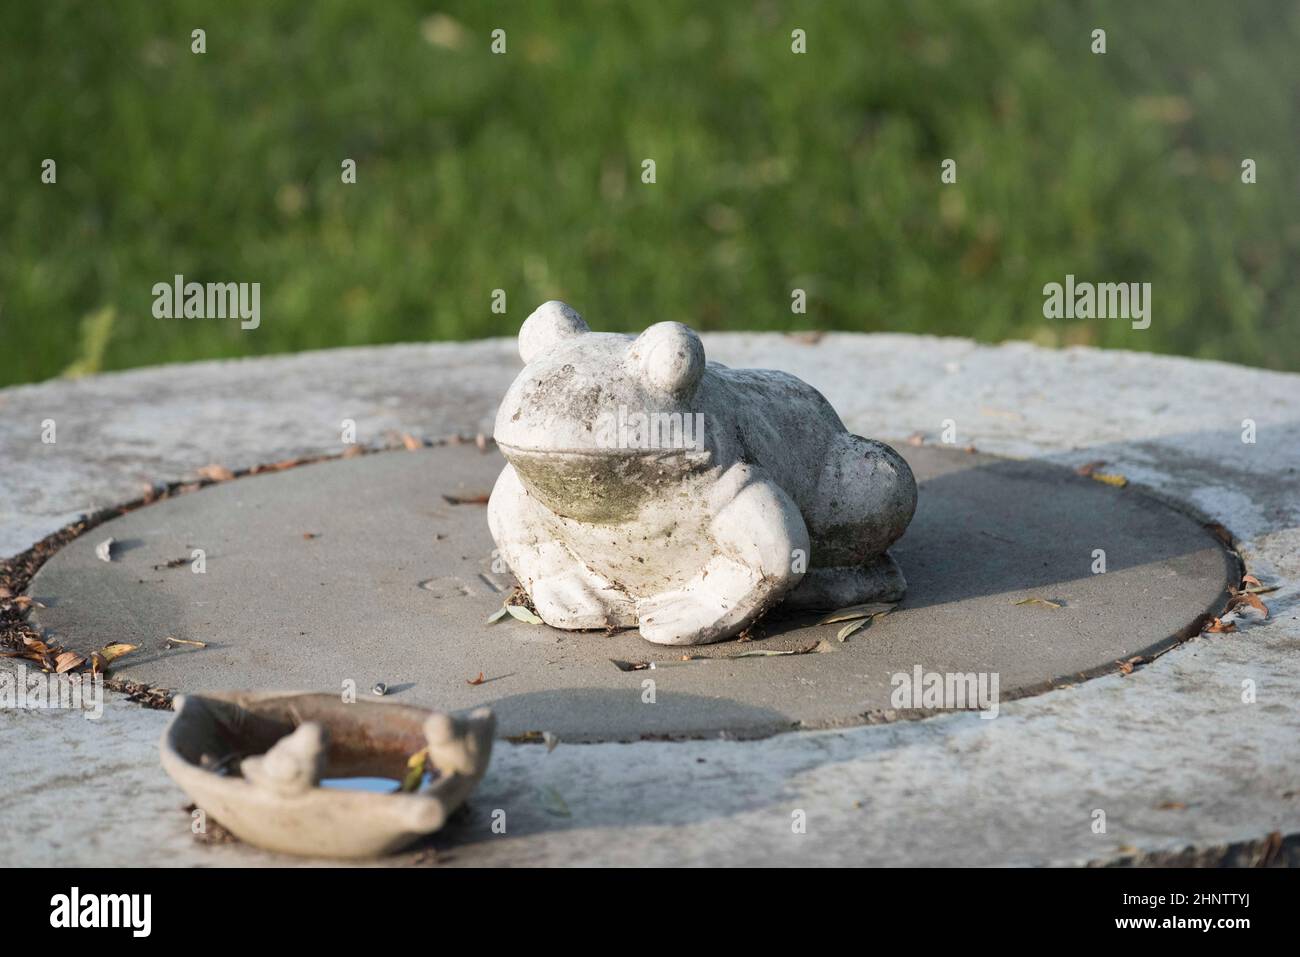 a frog made of stone, symbol of an amphibious animal Stock Photo